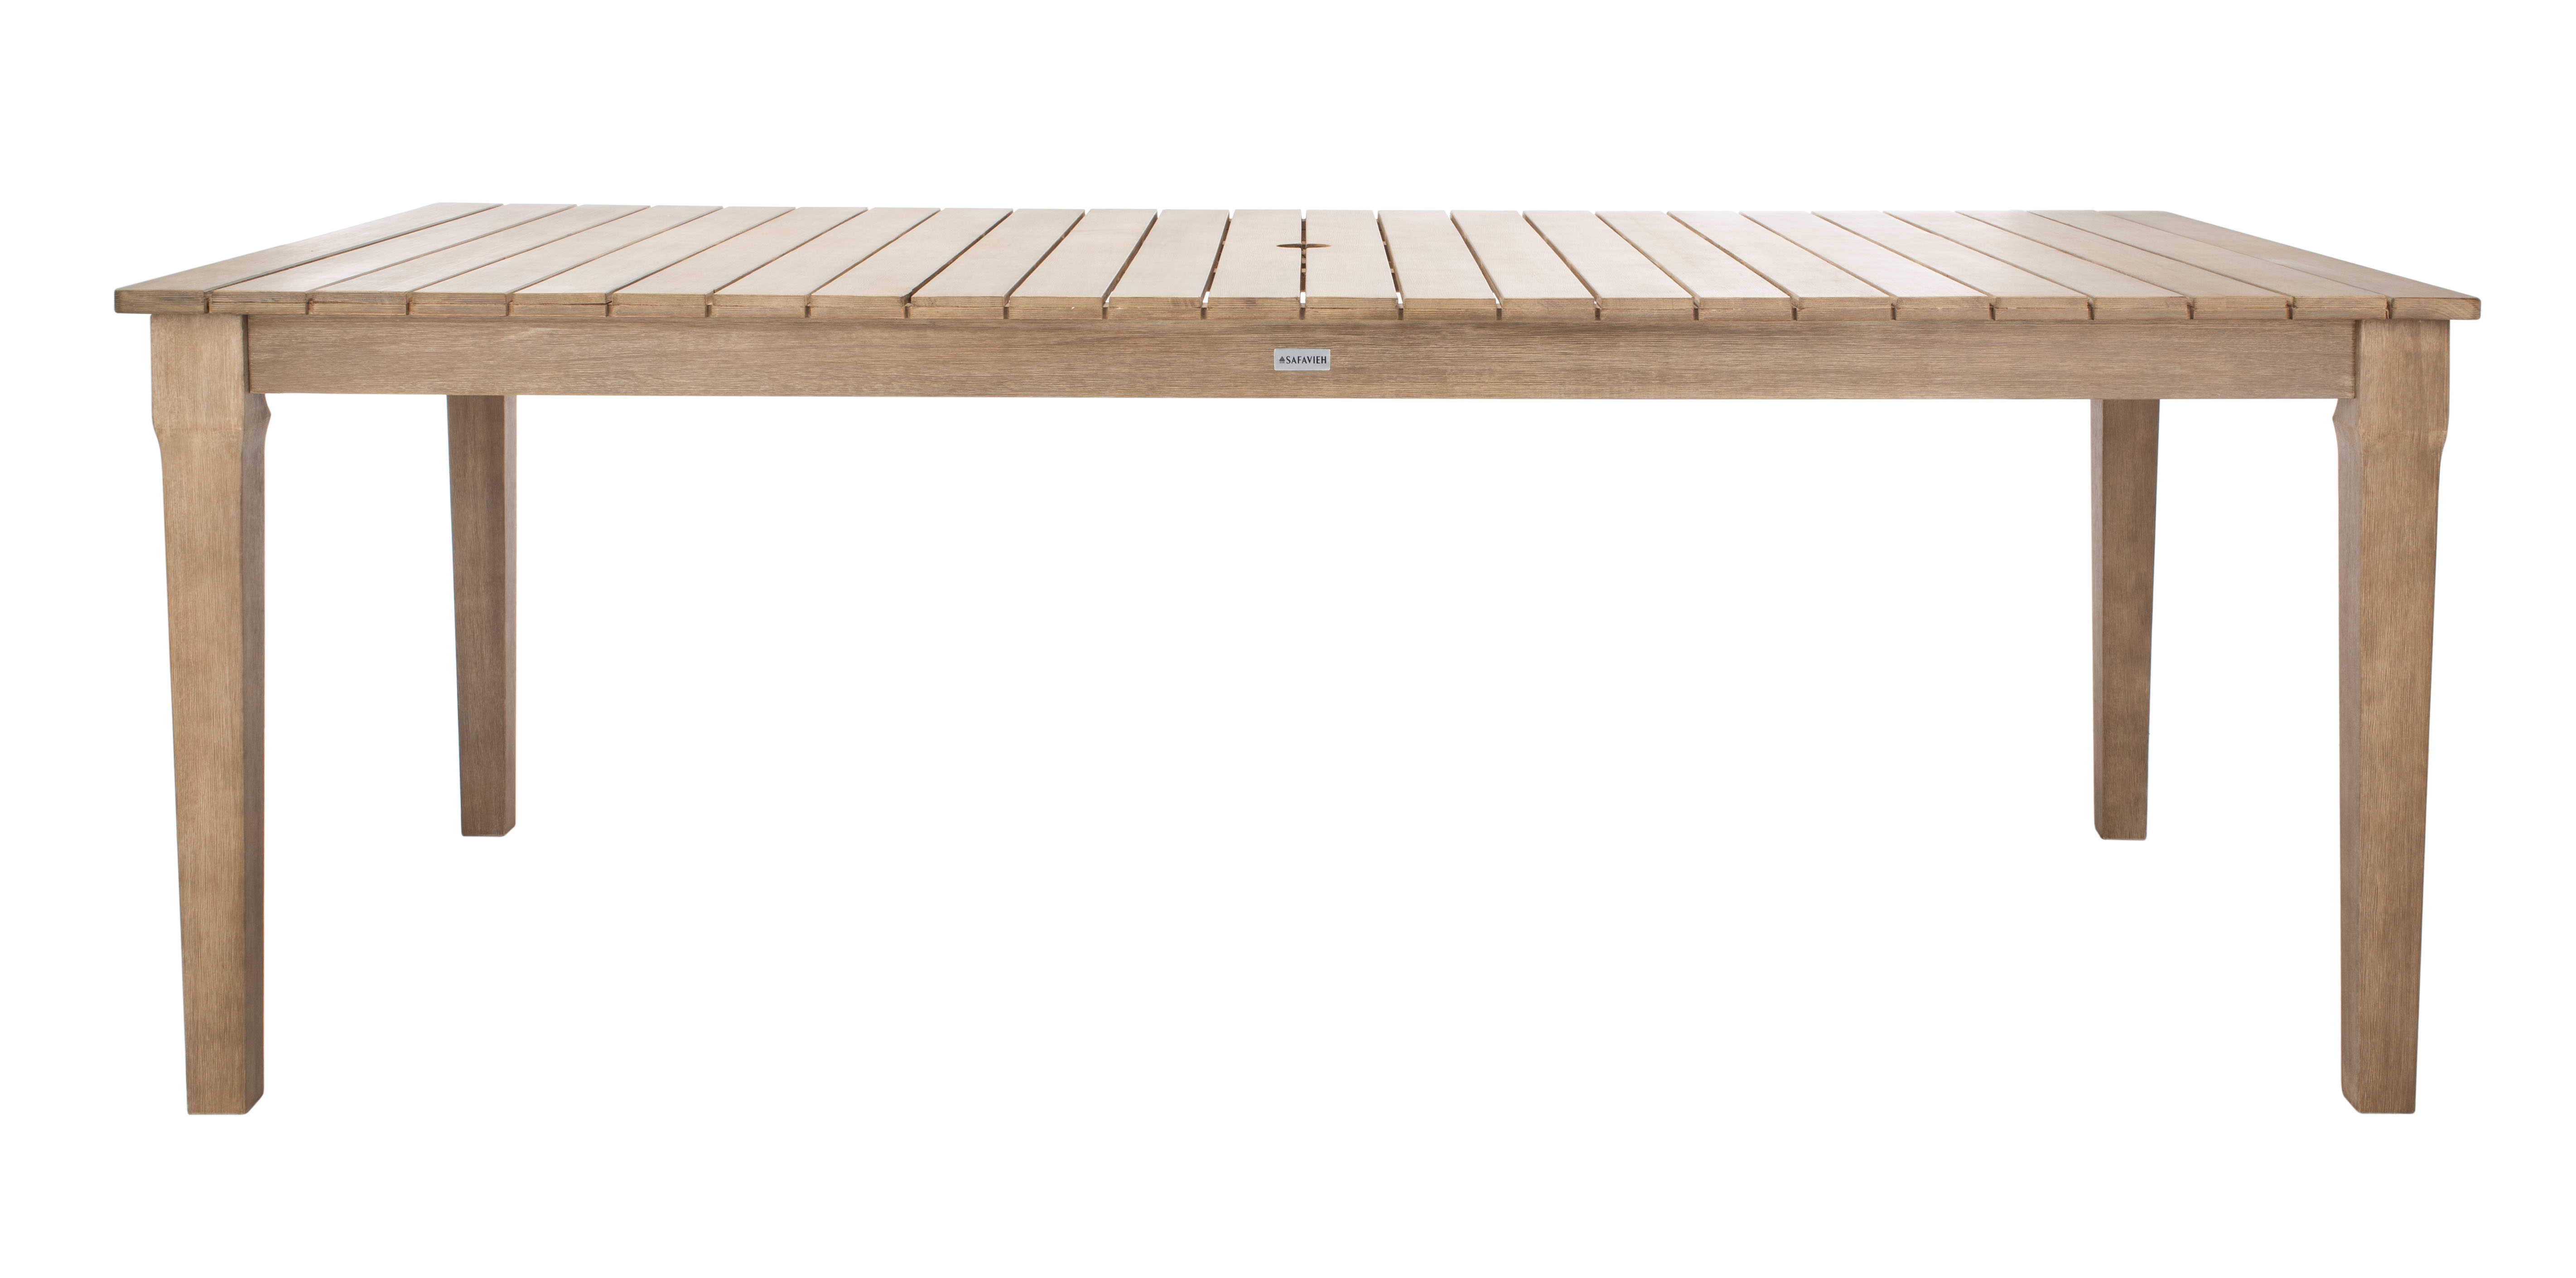 Dominica Wooden Outdoor Dining Table - Natural - Arlo Home - Image 1